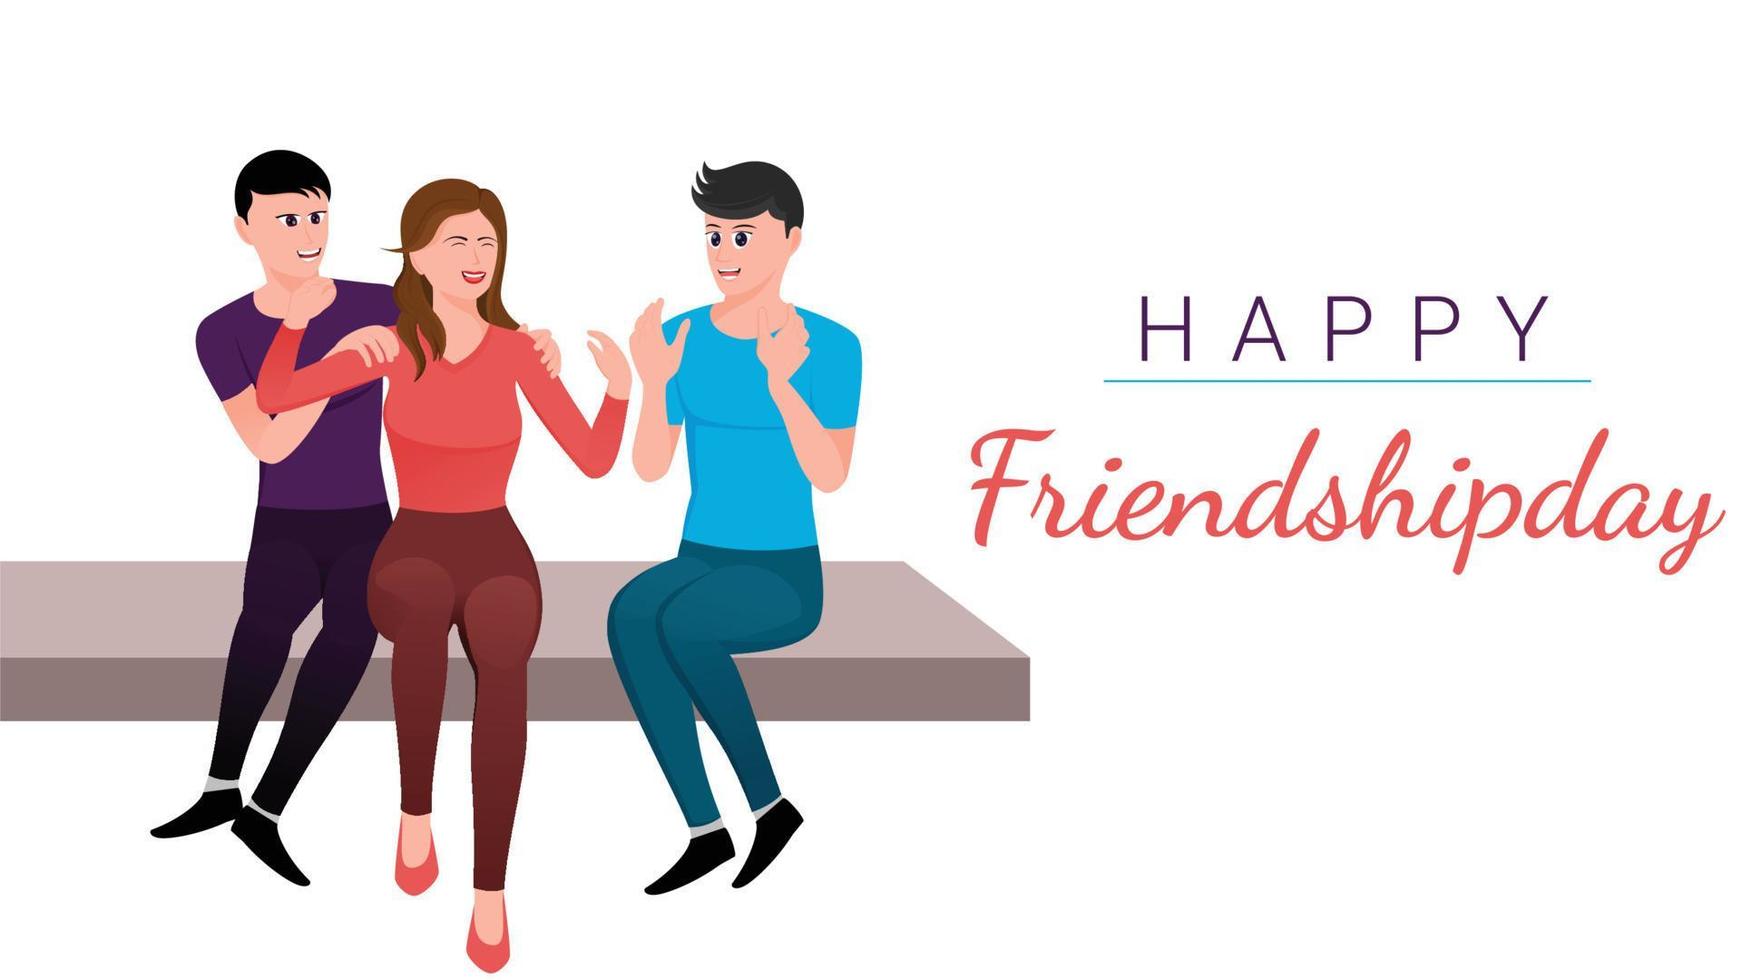 Three happy best friends character vector illustration, Happy friendship day.